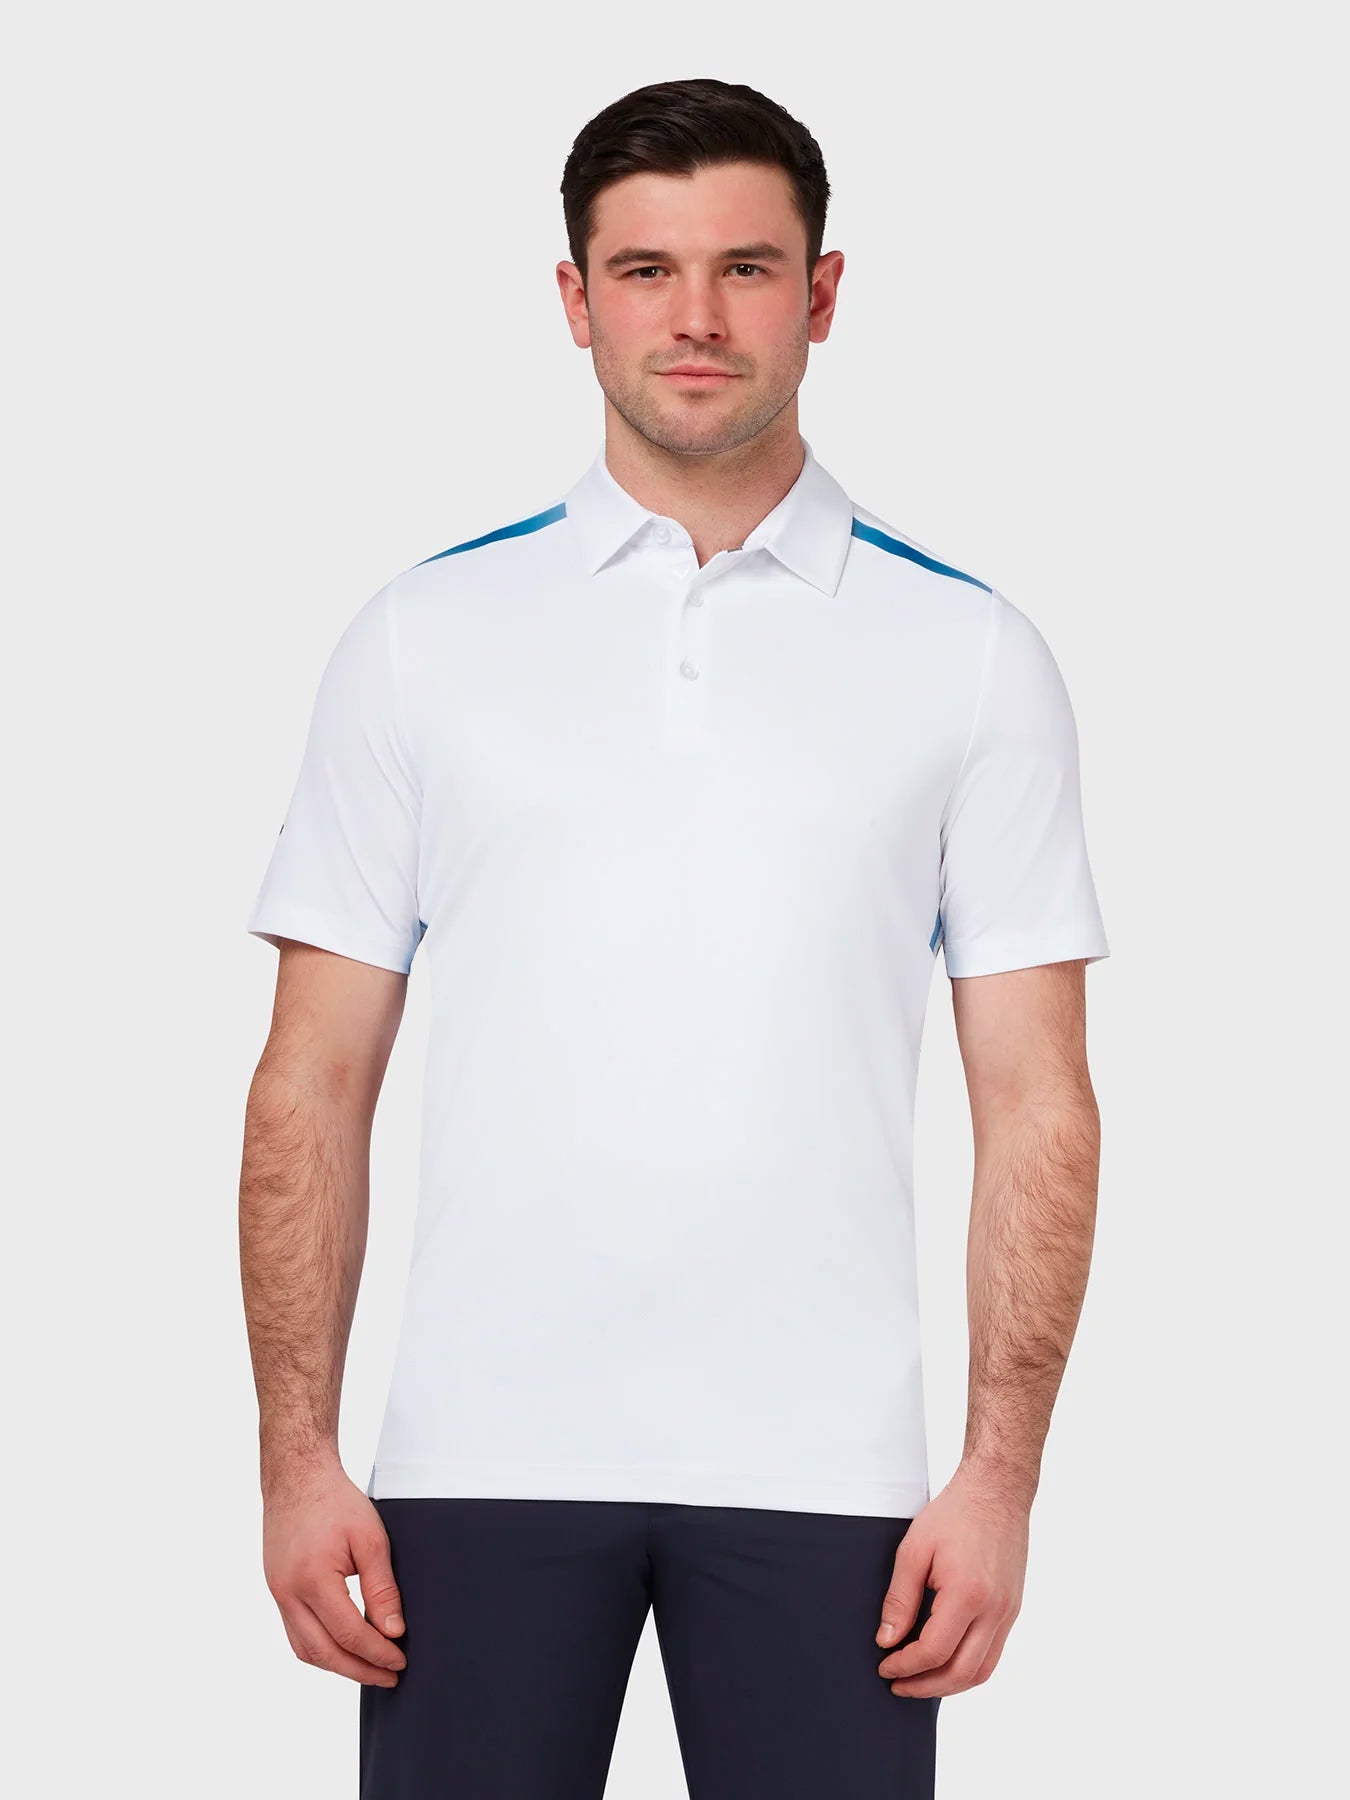 View Performance Colour Block Polo In Bright White information